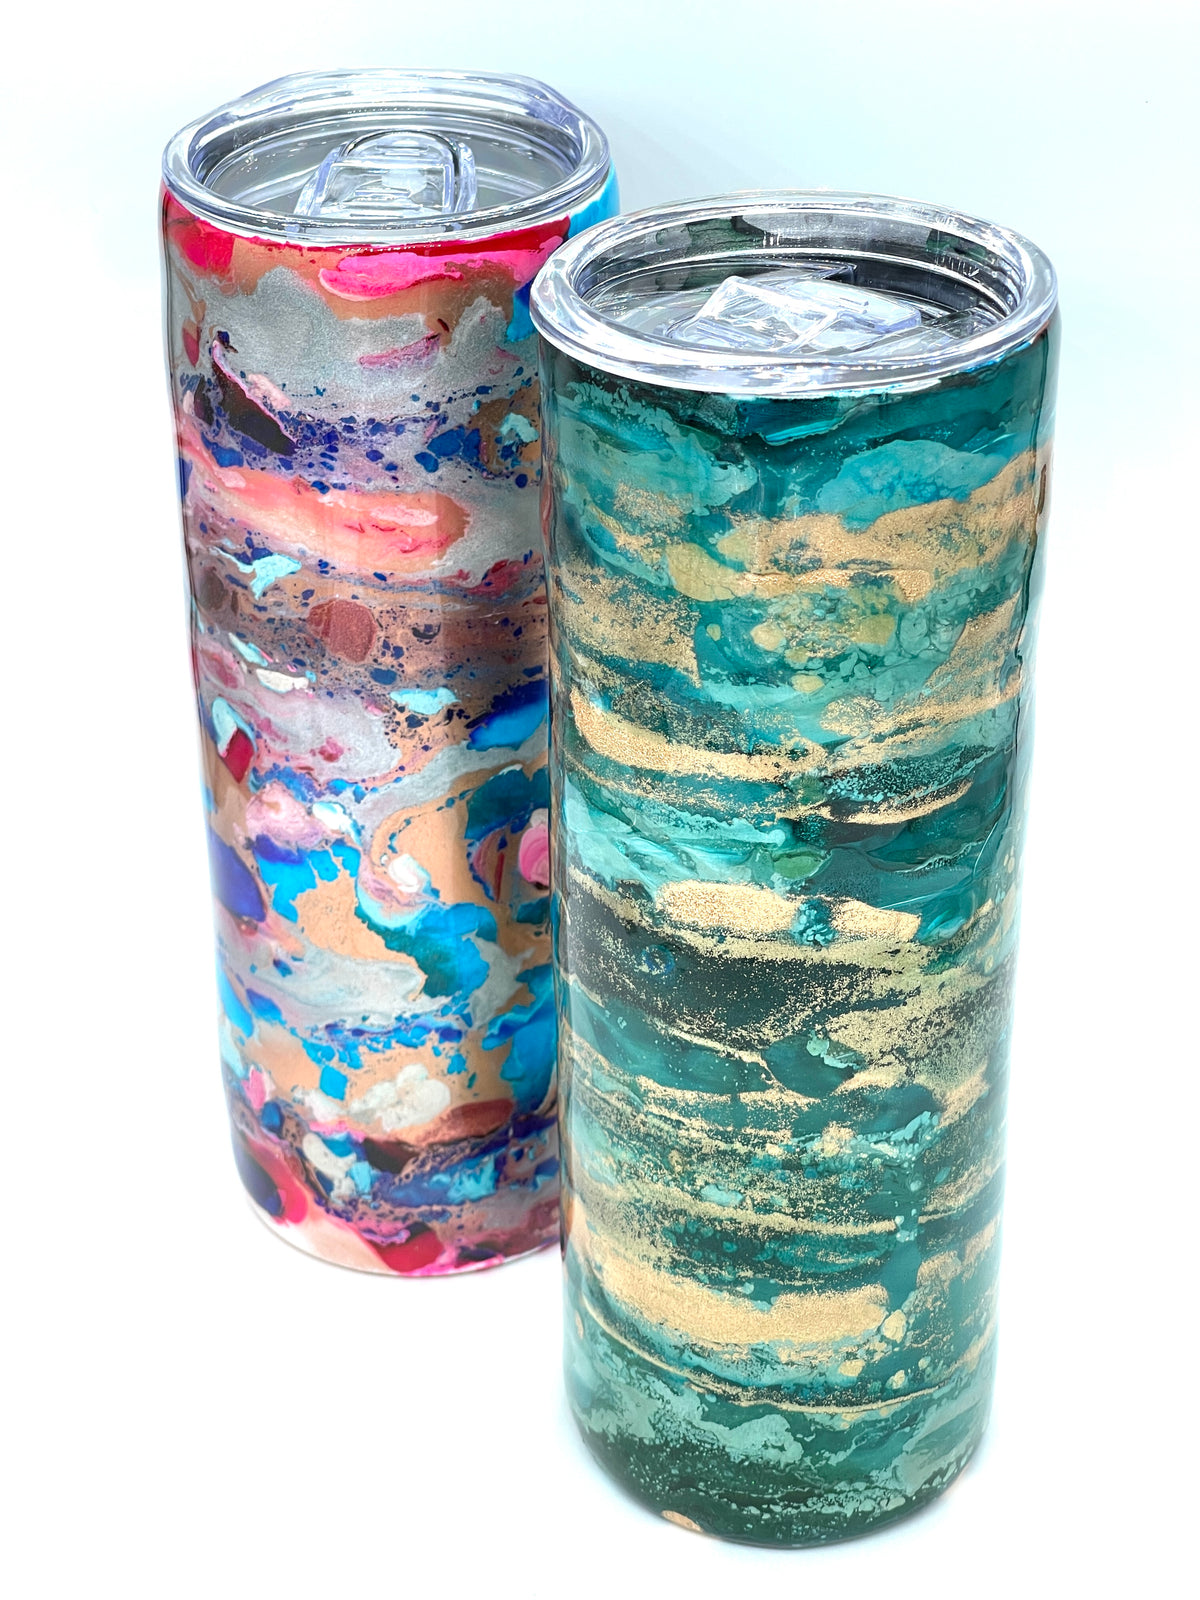 Perfect Finish Premium Artist Epoxy Resin For Coating Tumblers and Artwork